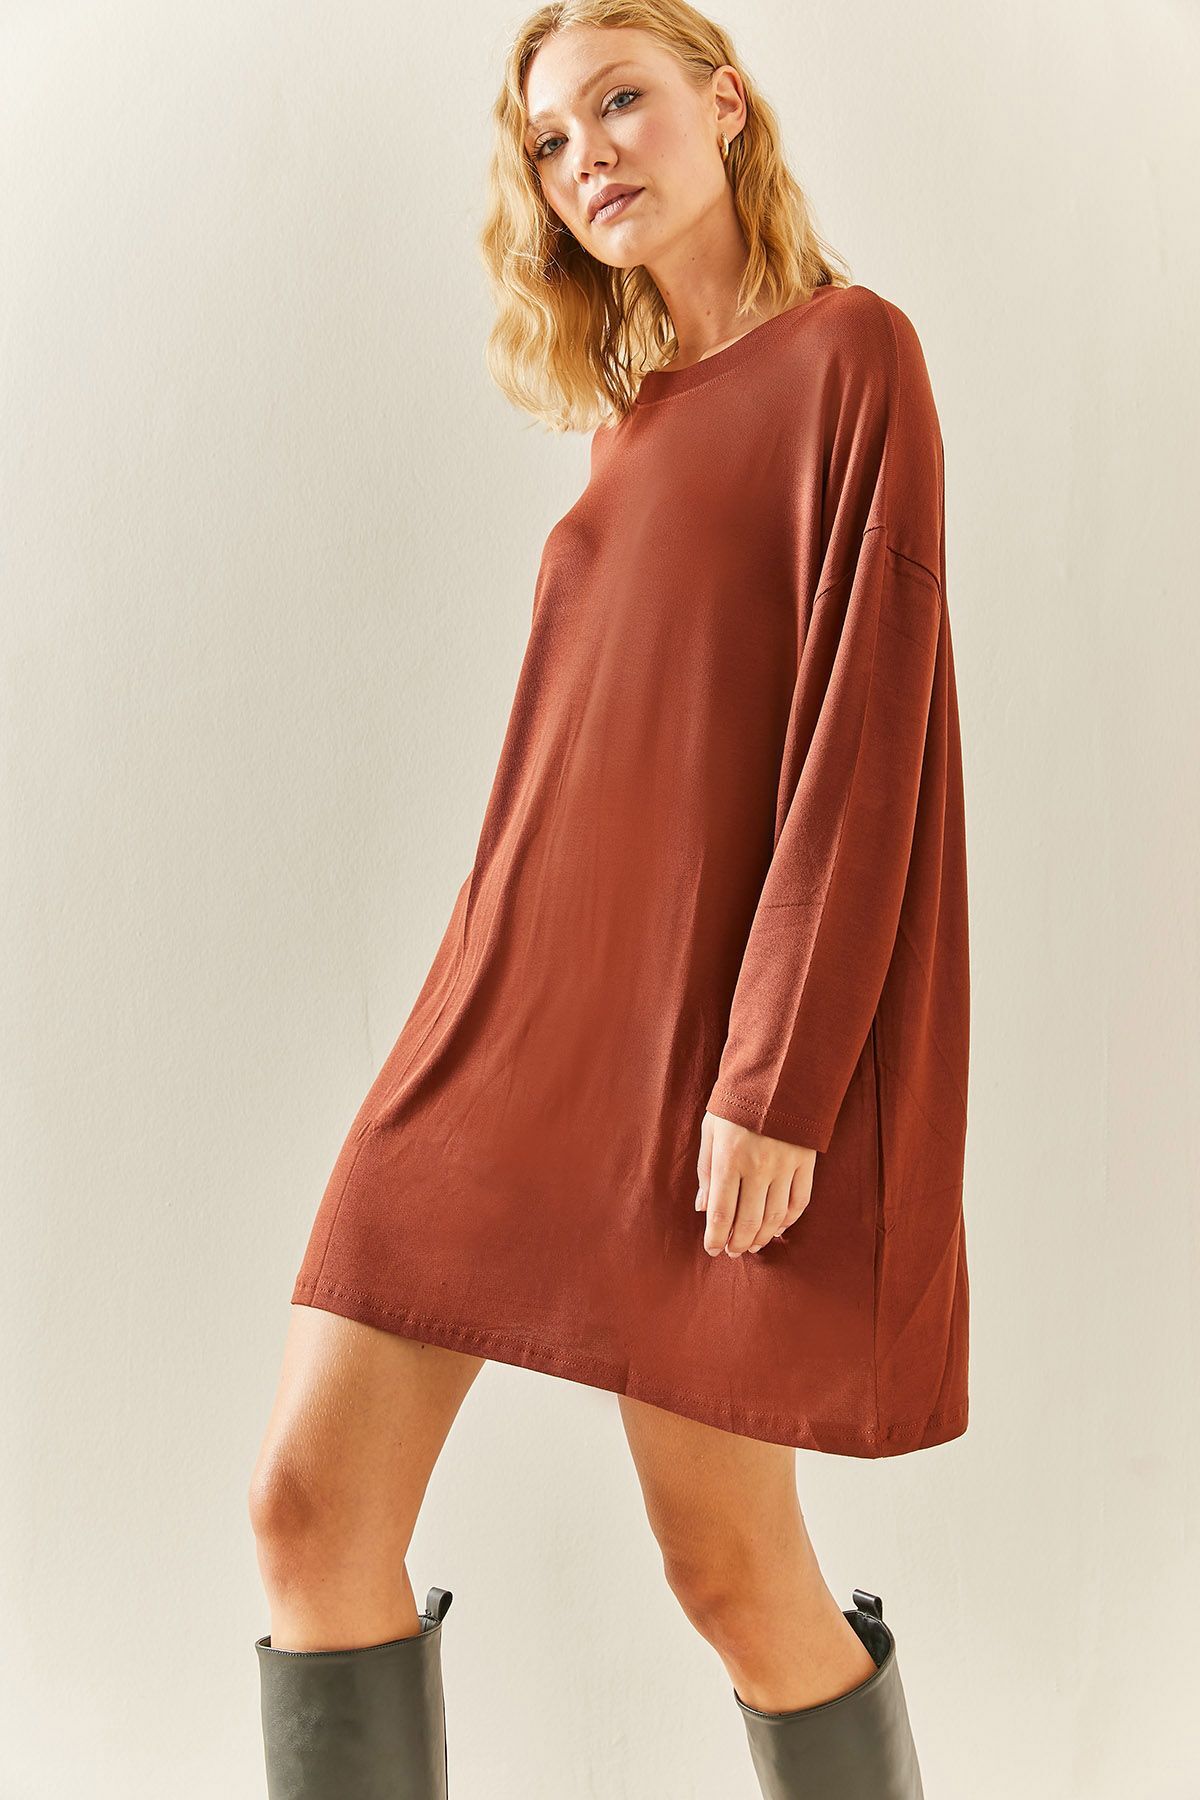 XHAN Brown Crew Neck Flowy Knitted Dress